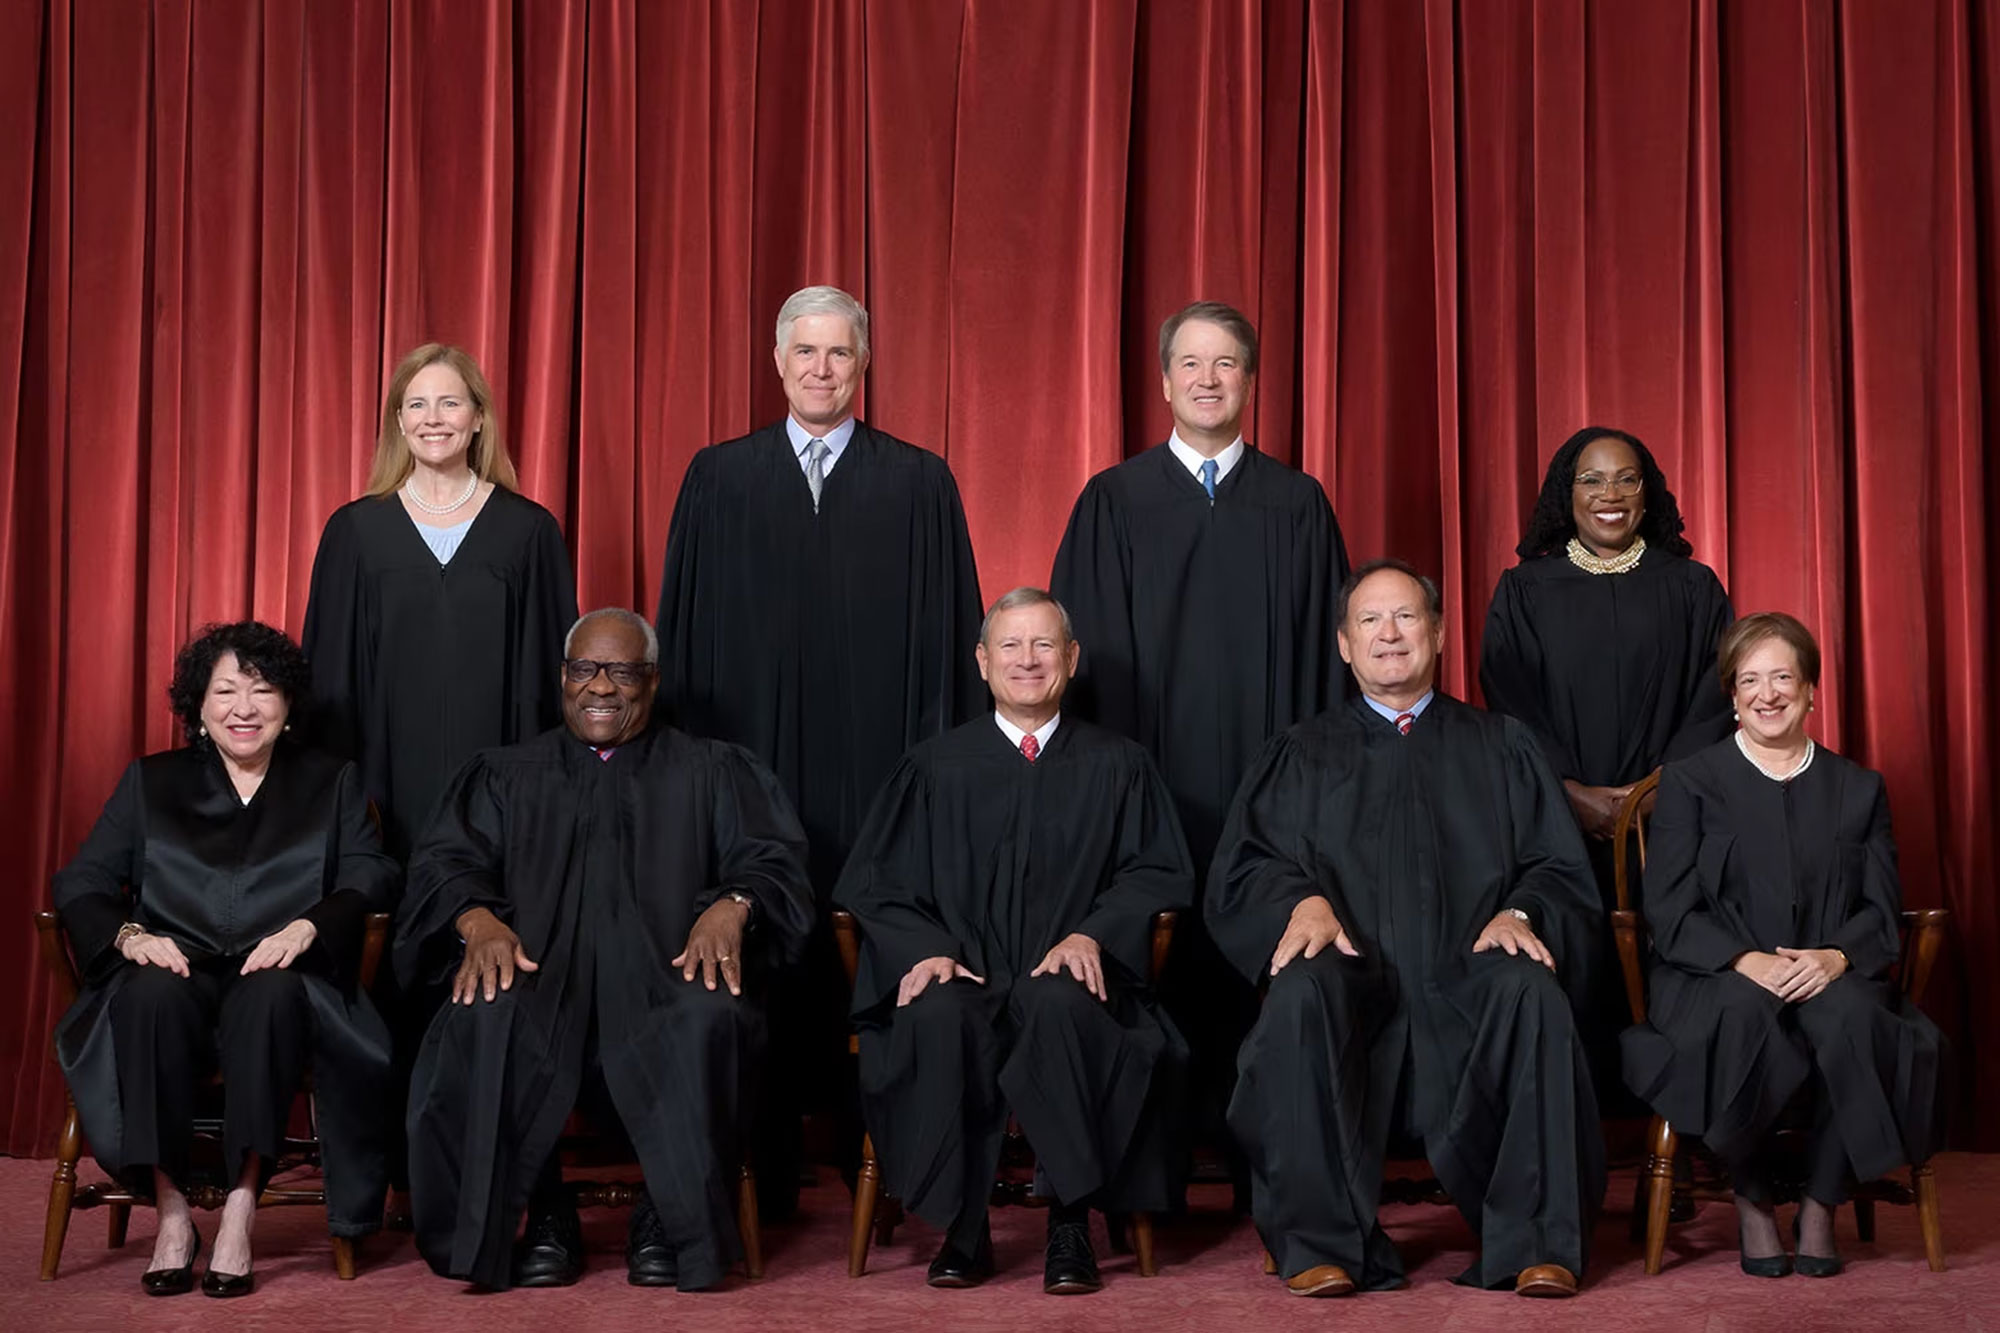 US Supreme Court justices sitting and standing in black robes (Affirmative Action)